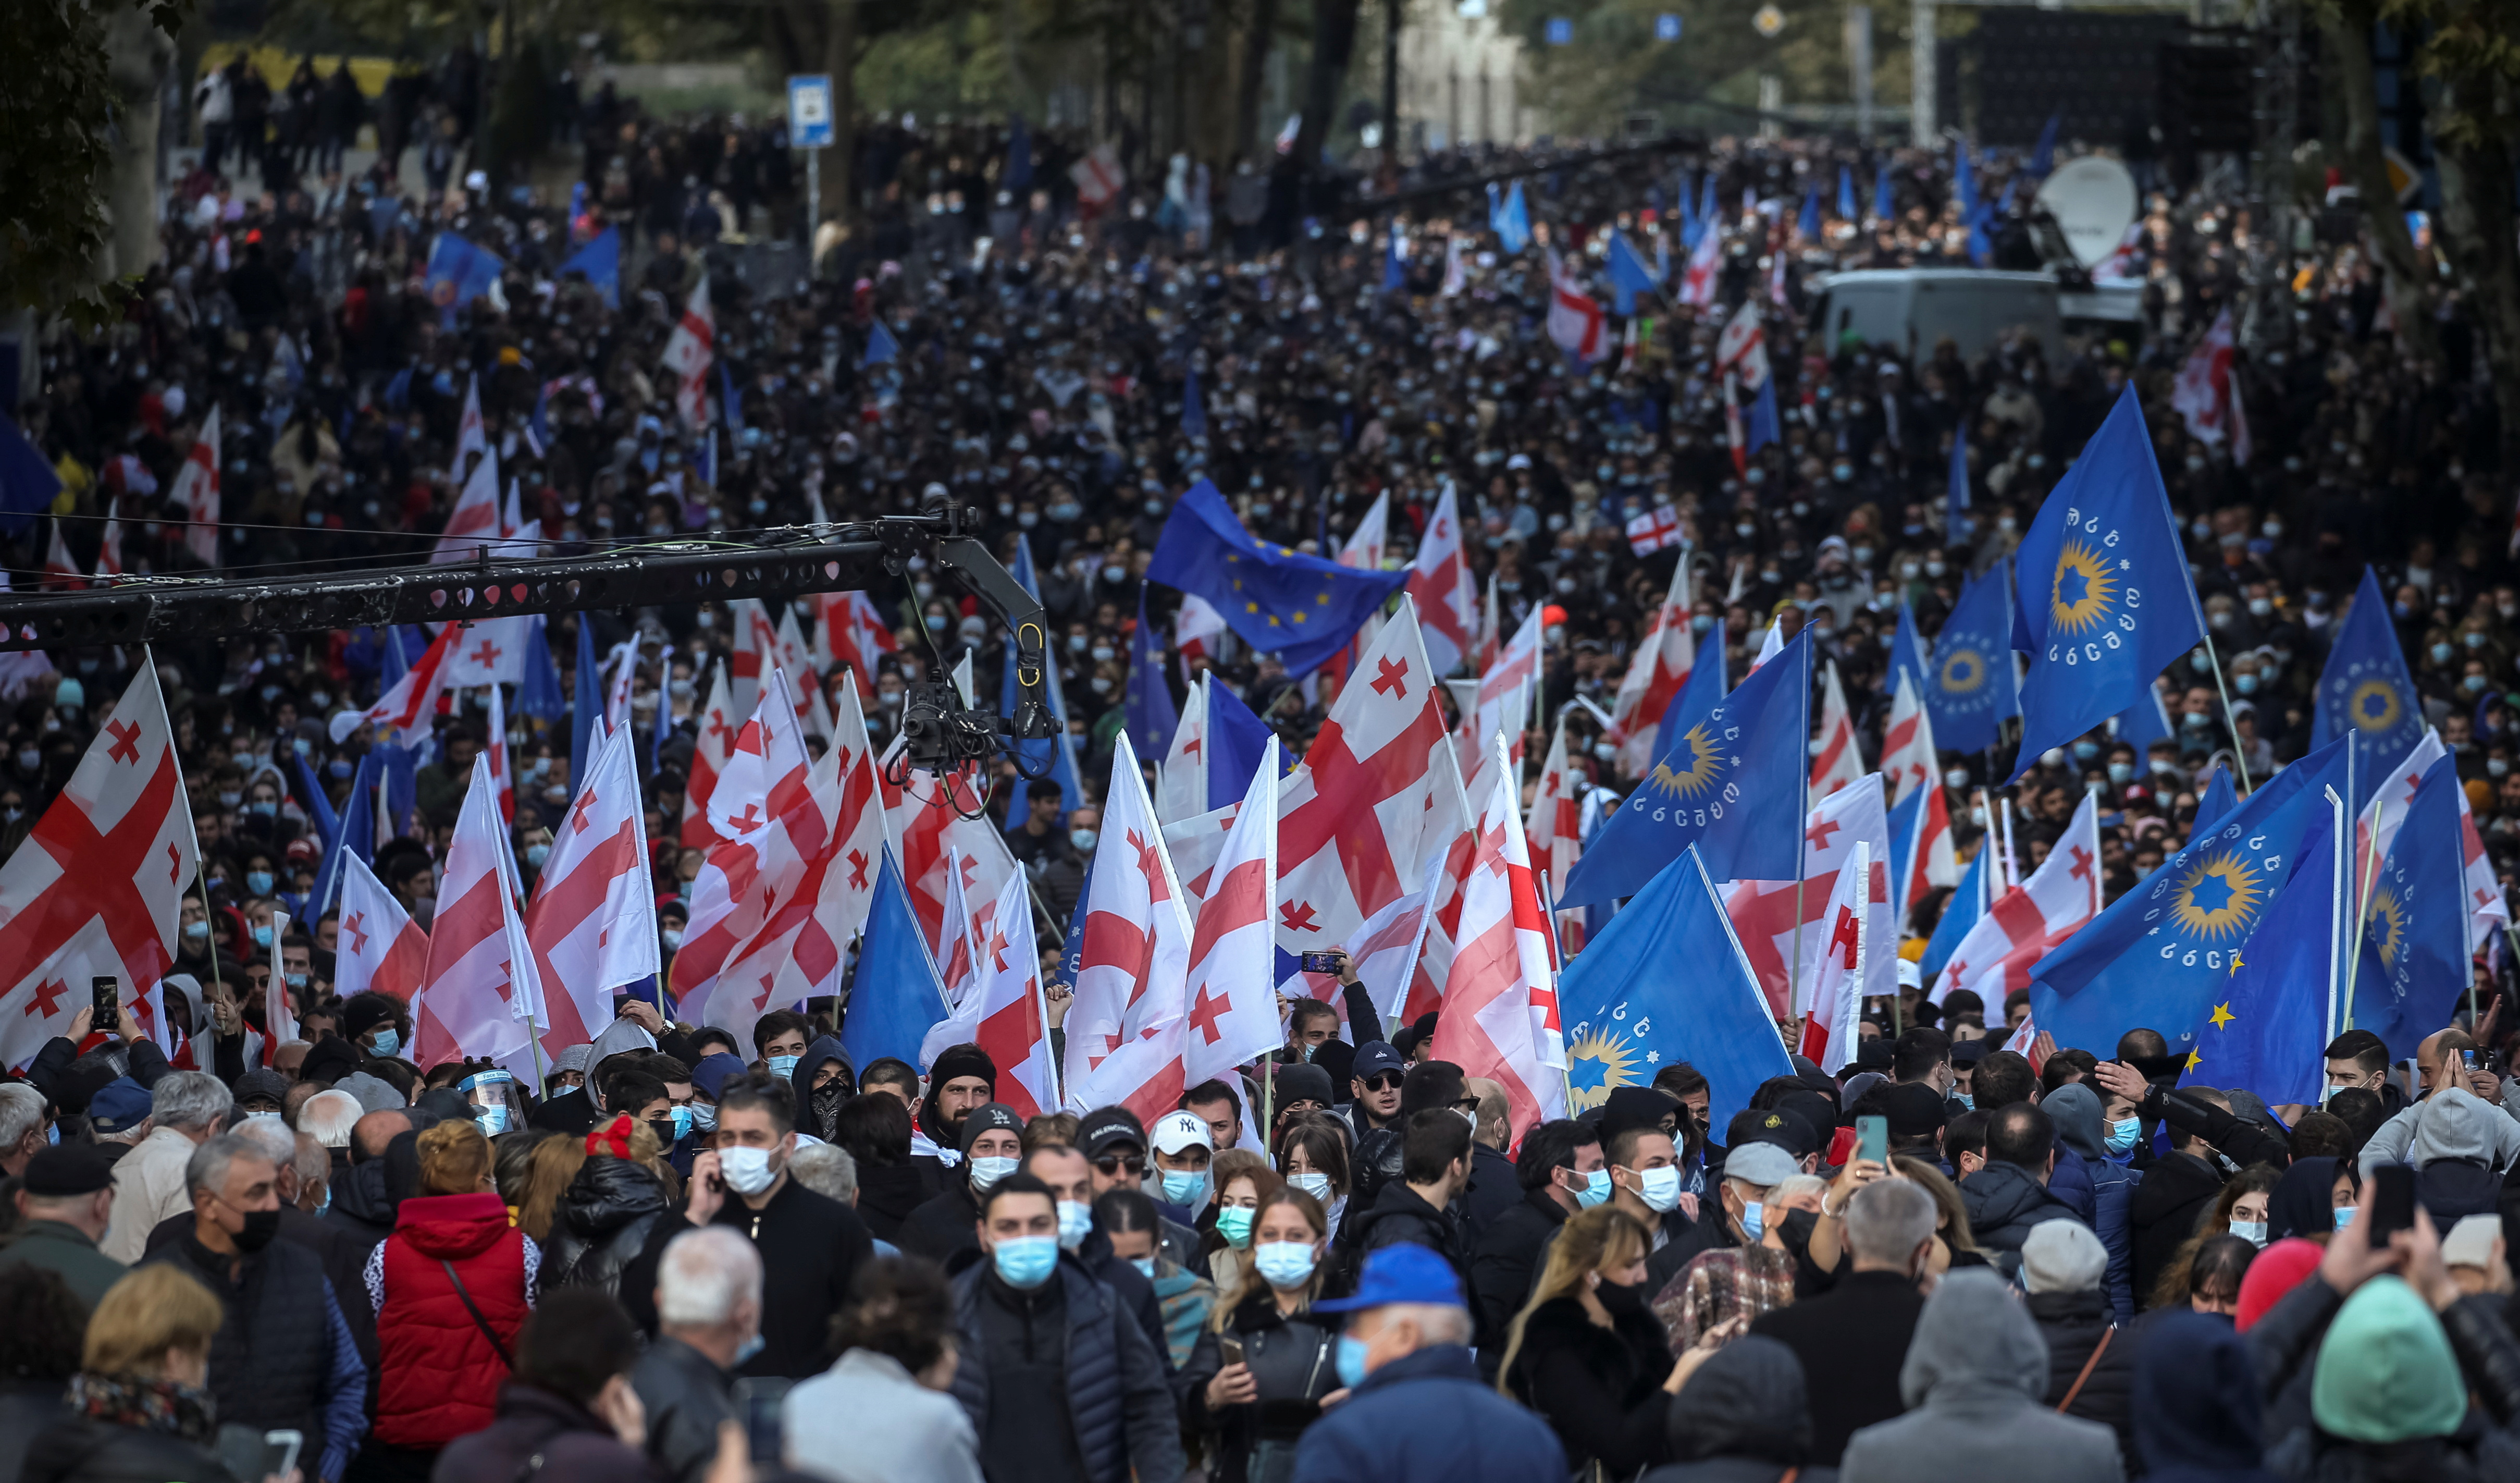 Georgian Dream ruling party holds a rally ahead of the run-off of the local election in Tbilisi